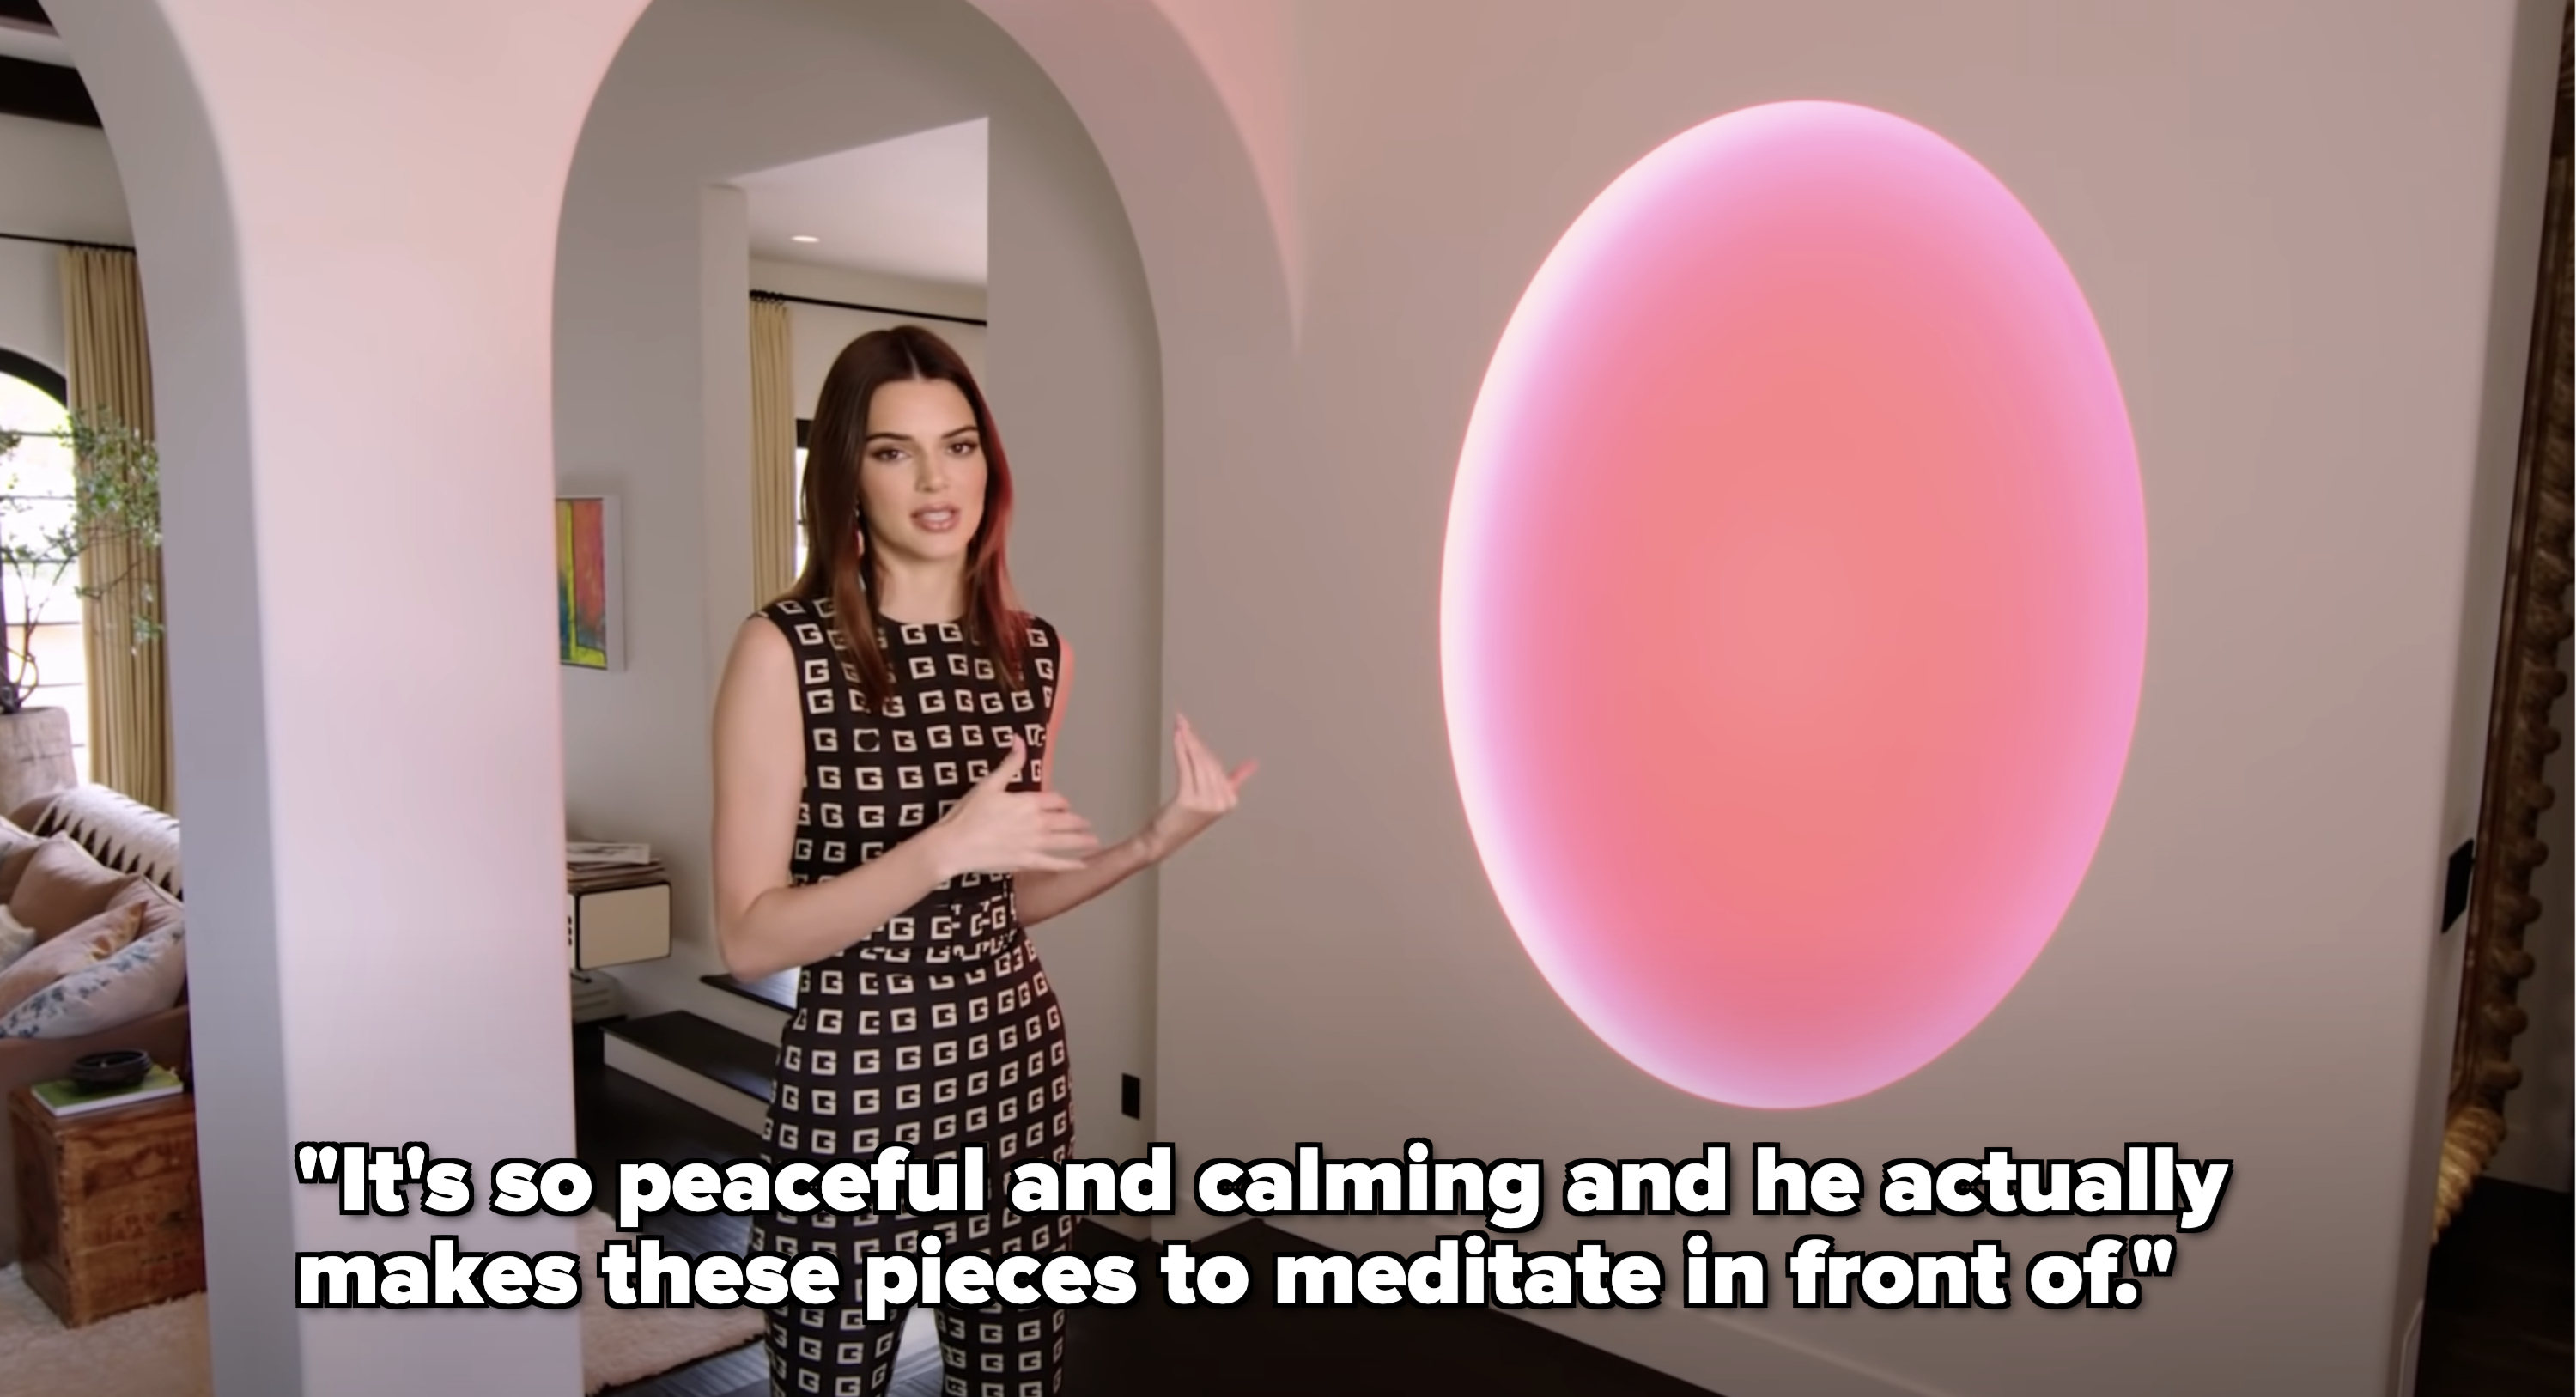 Kendall showing off her peaceful and calming art piece that is meant to meditate in front of